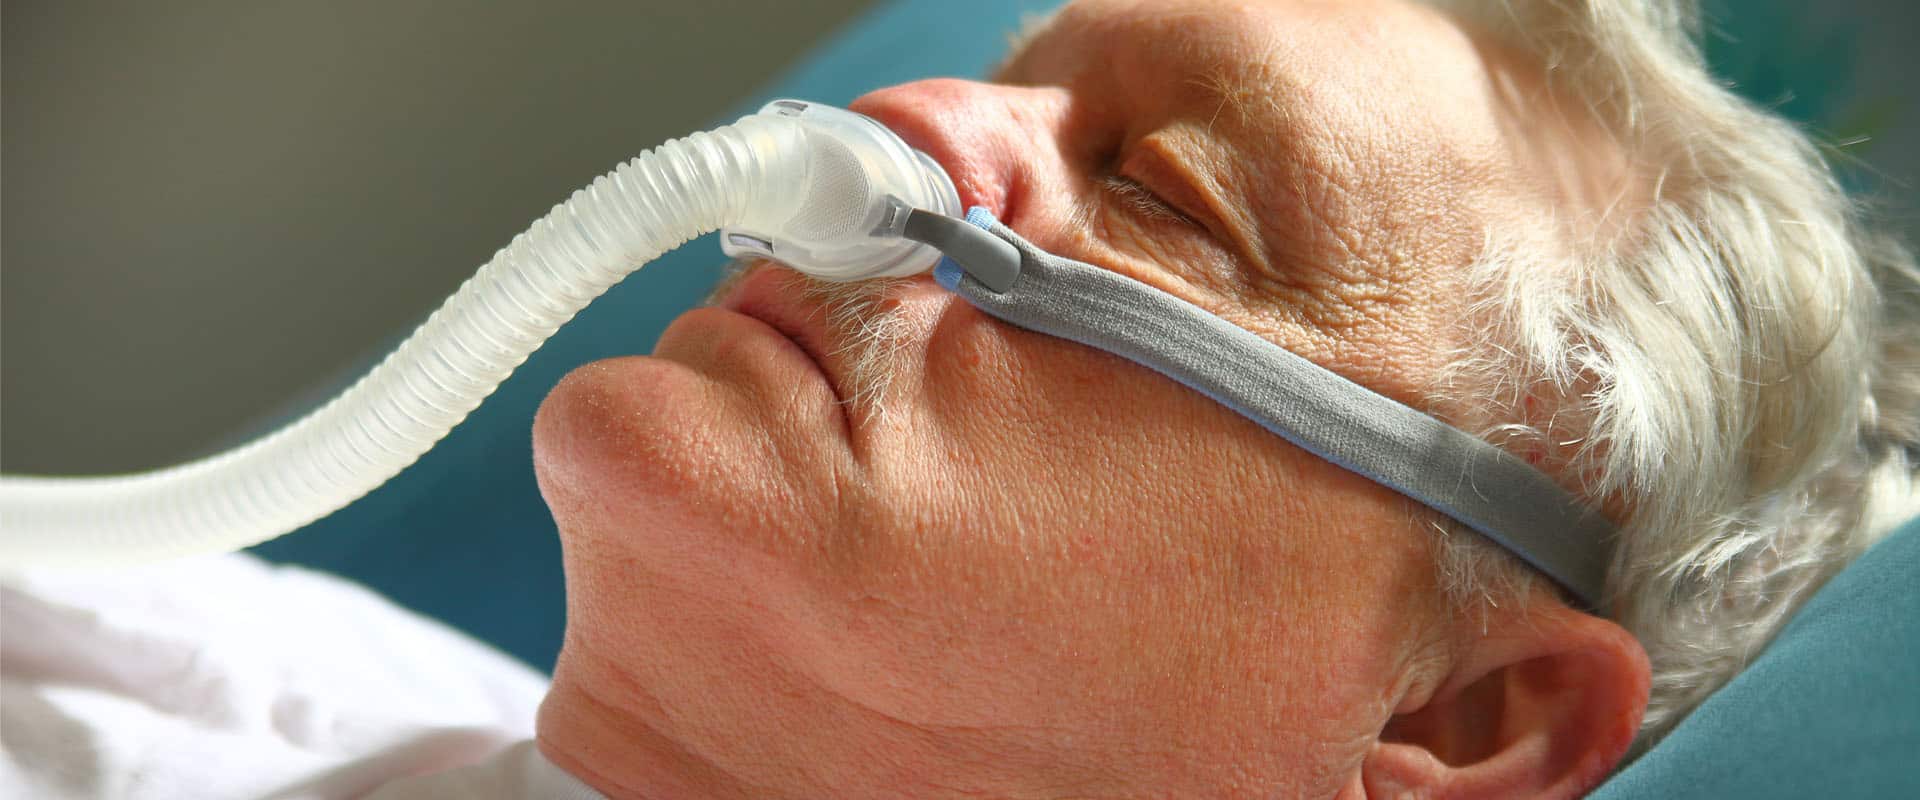 Sleep Apnea and Your Dentist - What You Need to Know